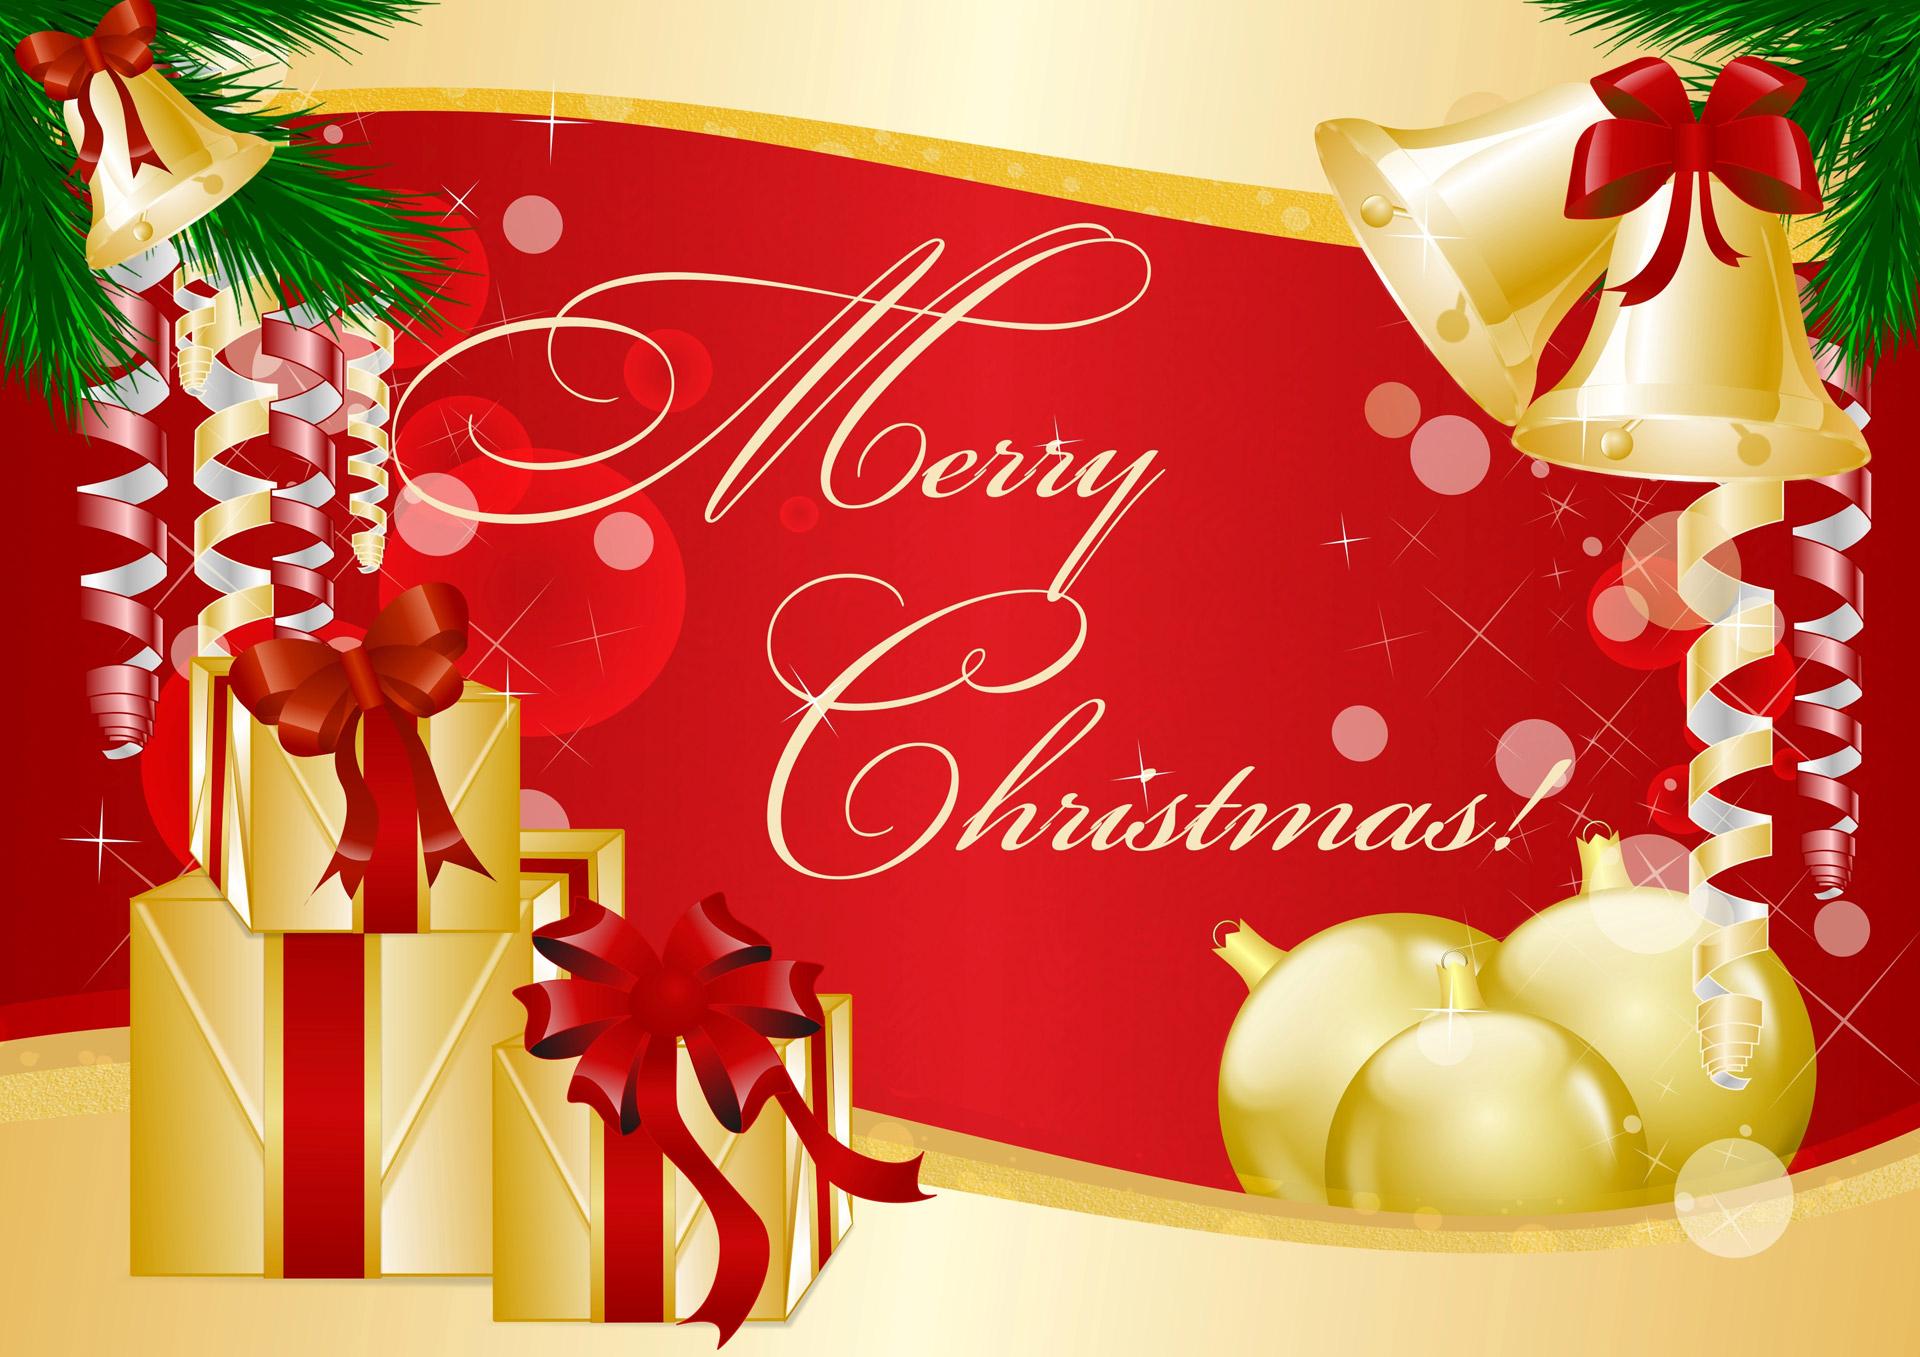 Merry Christmas Everyone HD Wallpaper. Background Image